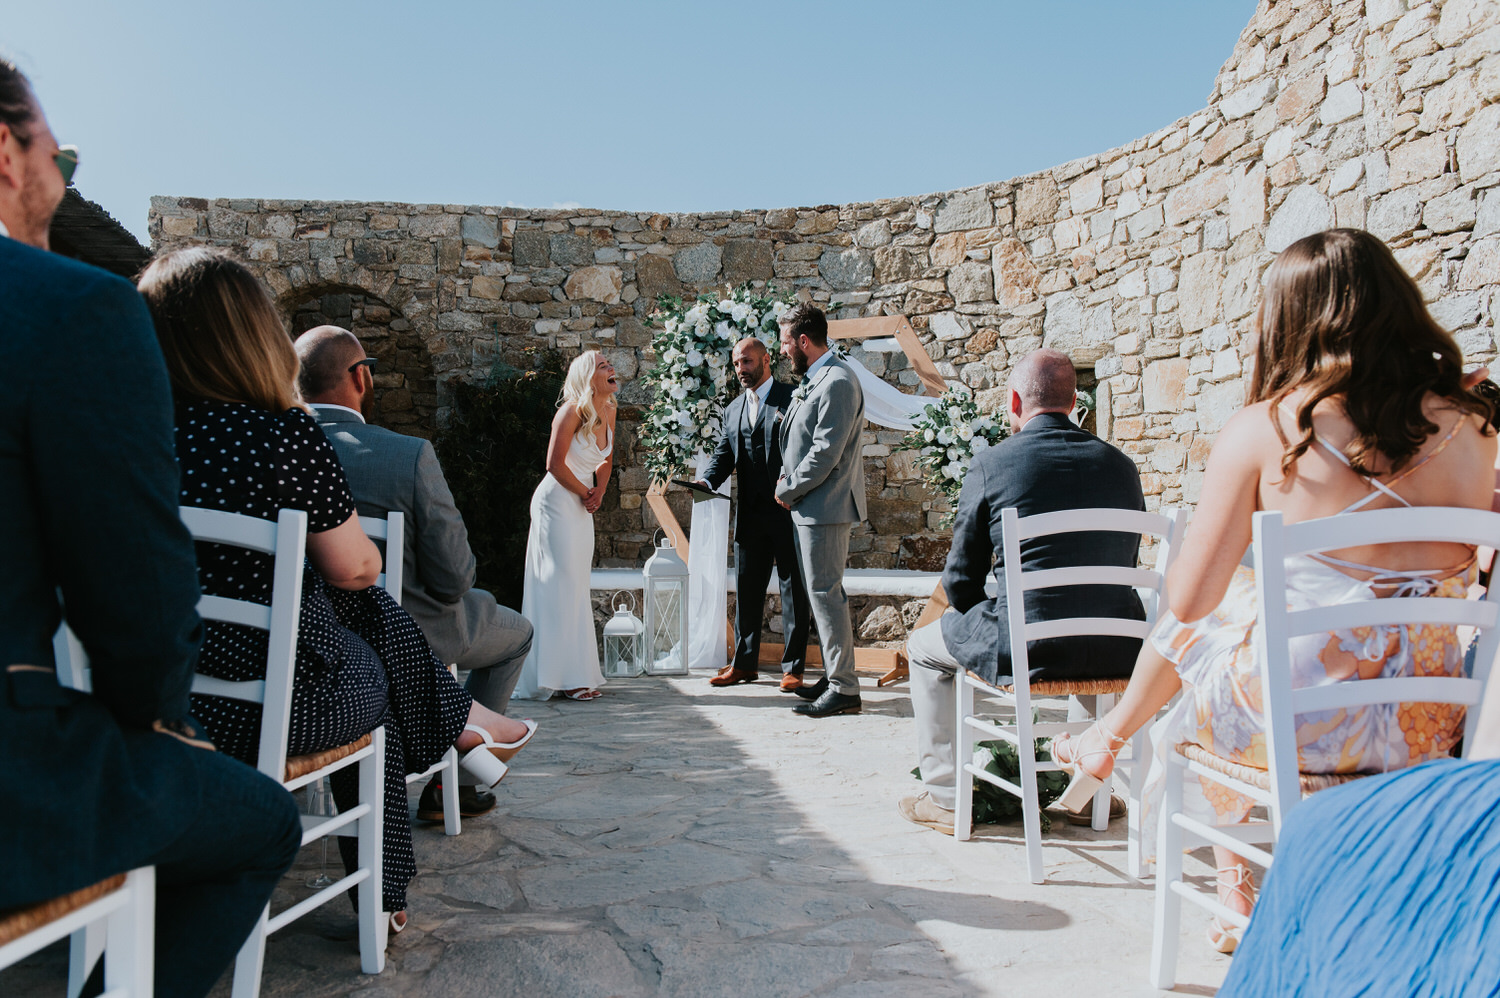 Mykonos wedding photographer: bride laughs as the celebrant and groom stand in front of the floral arch.